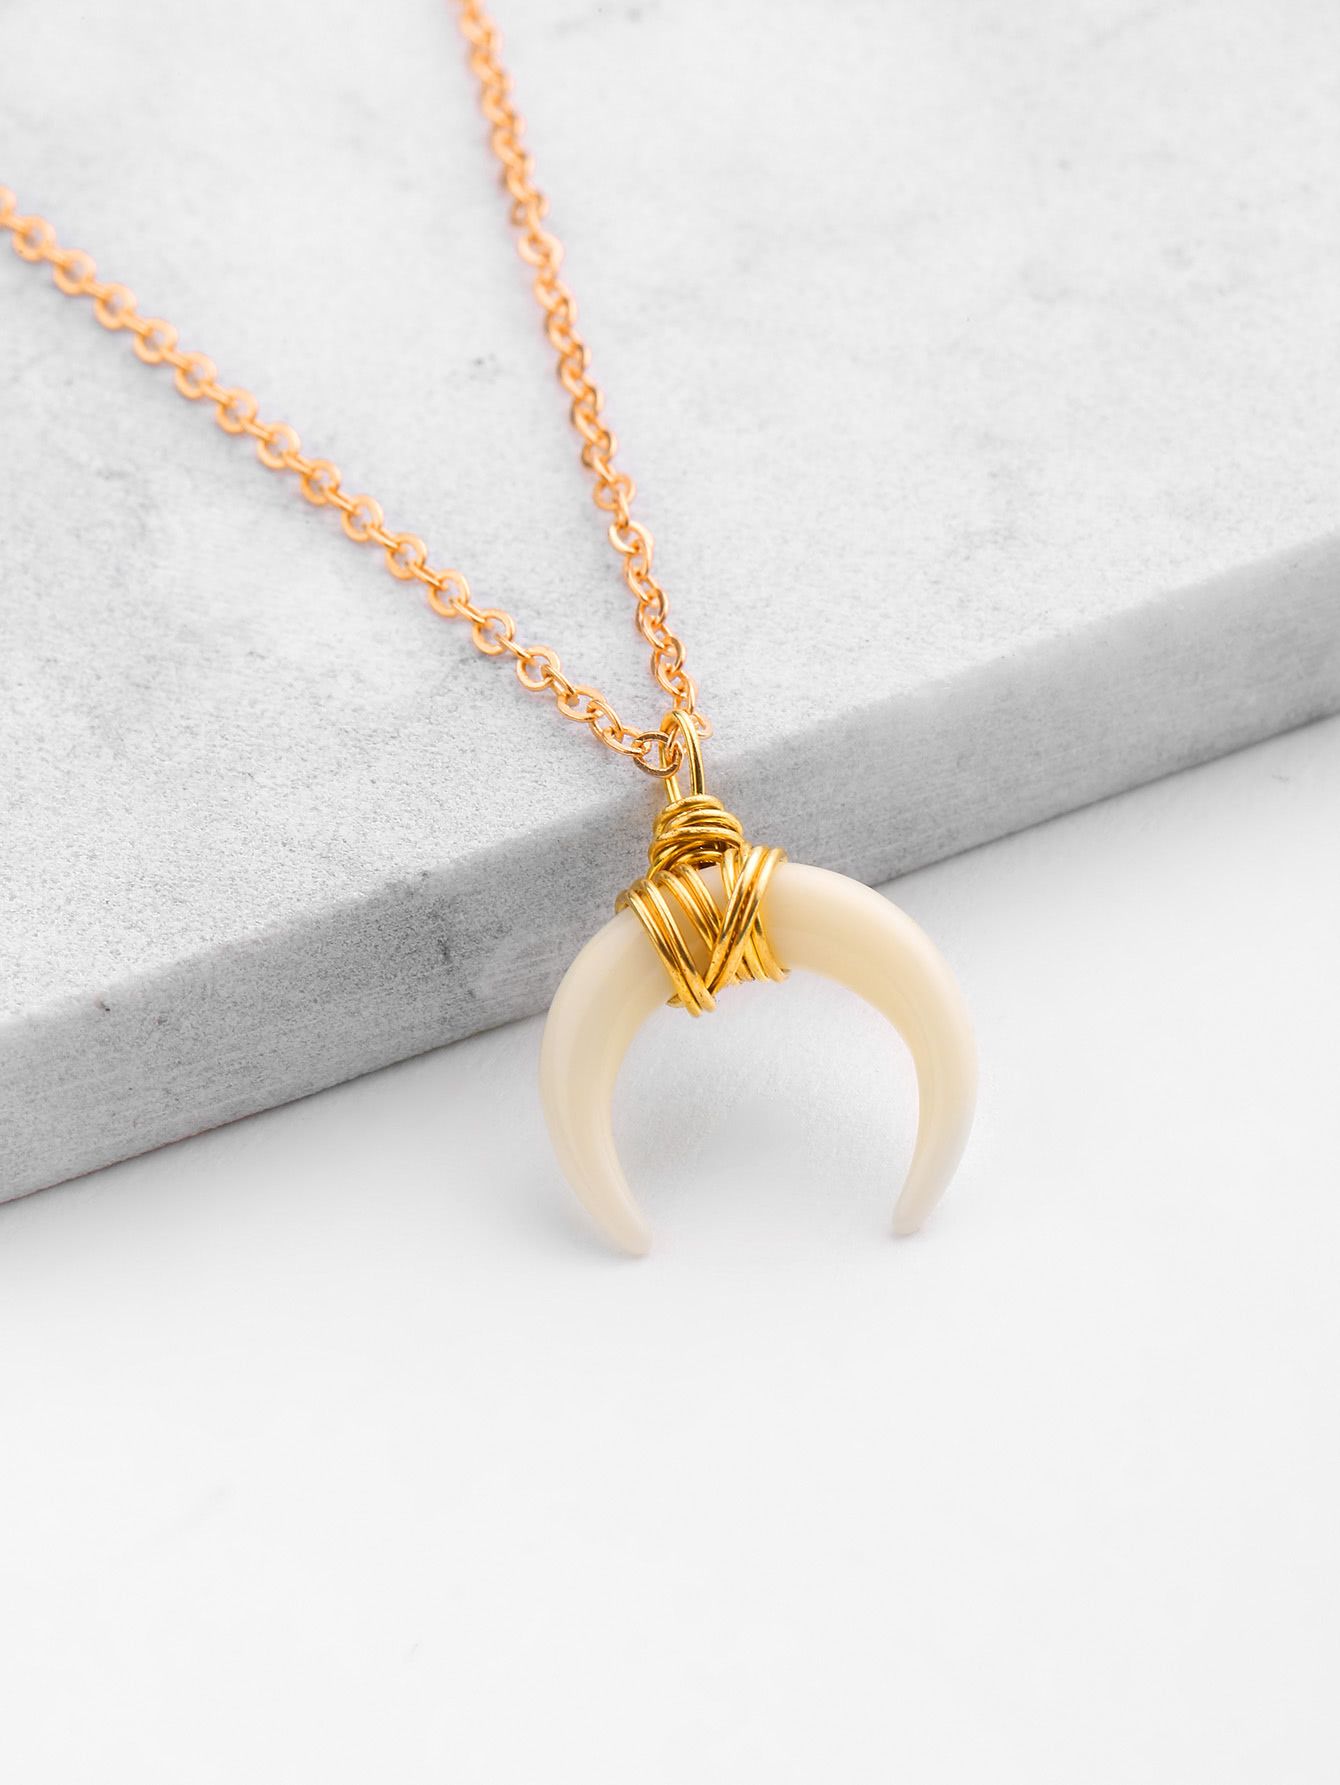 Moon Pendant Chain Necklace | SHEIN